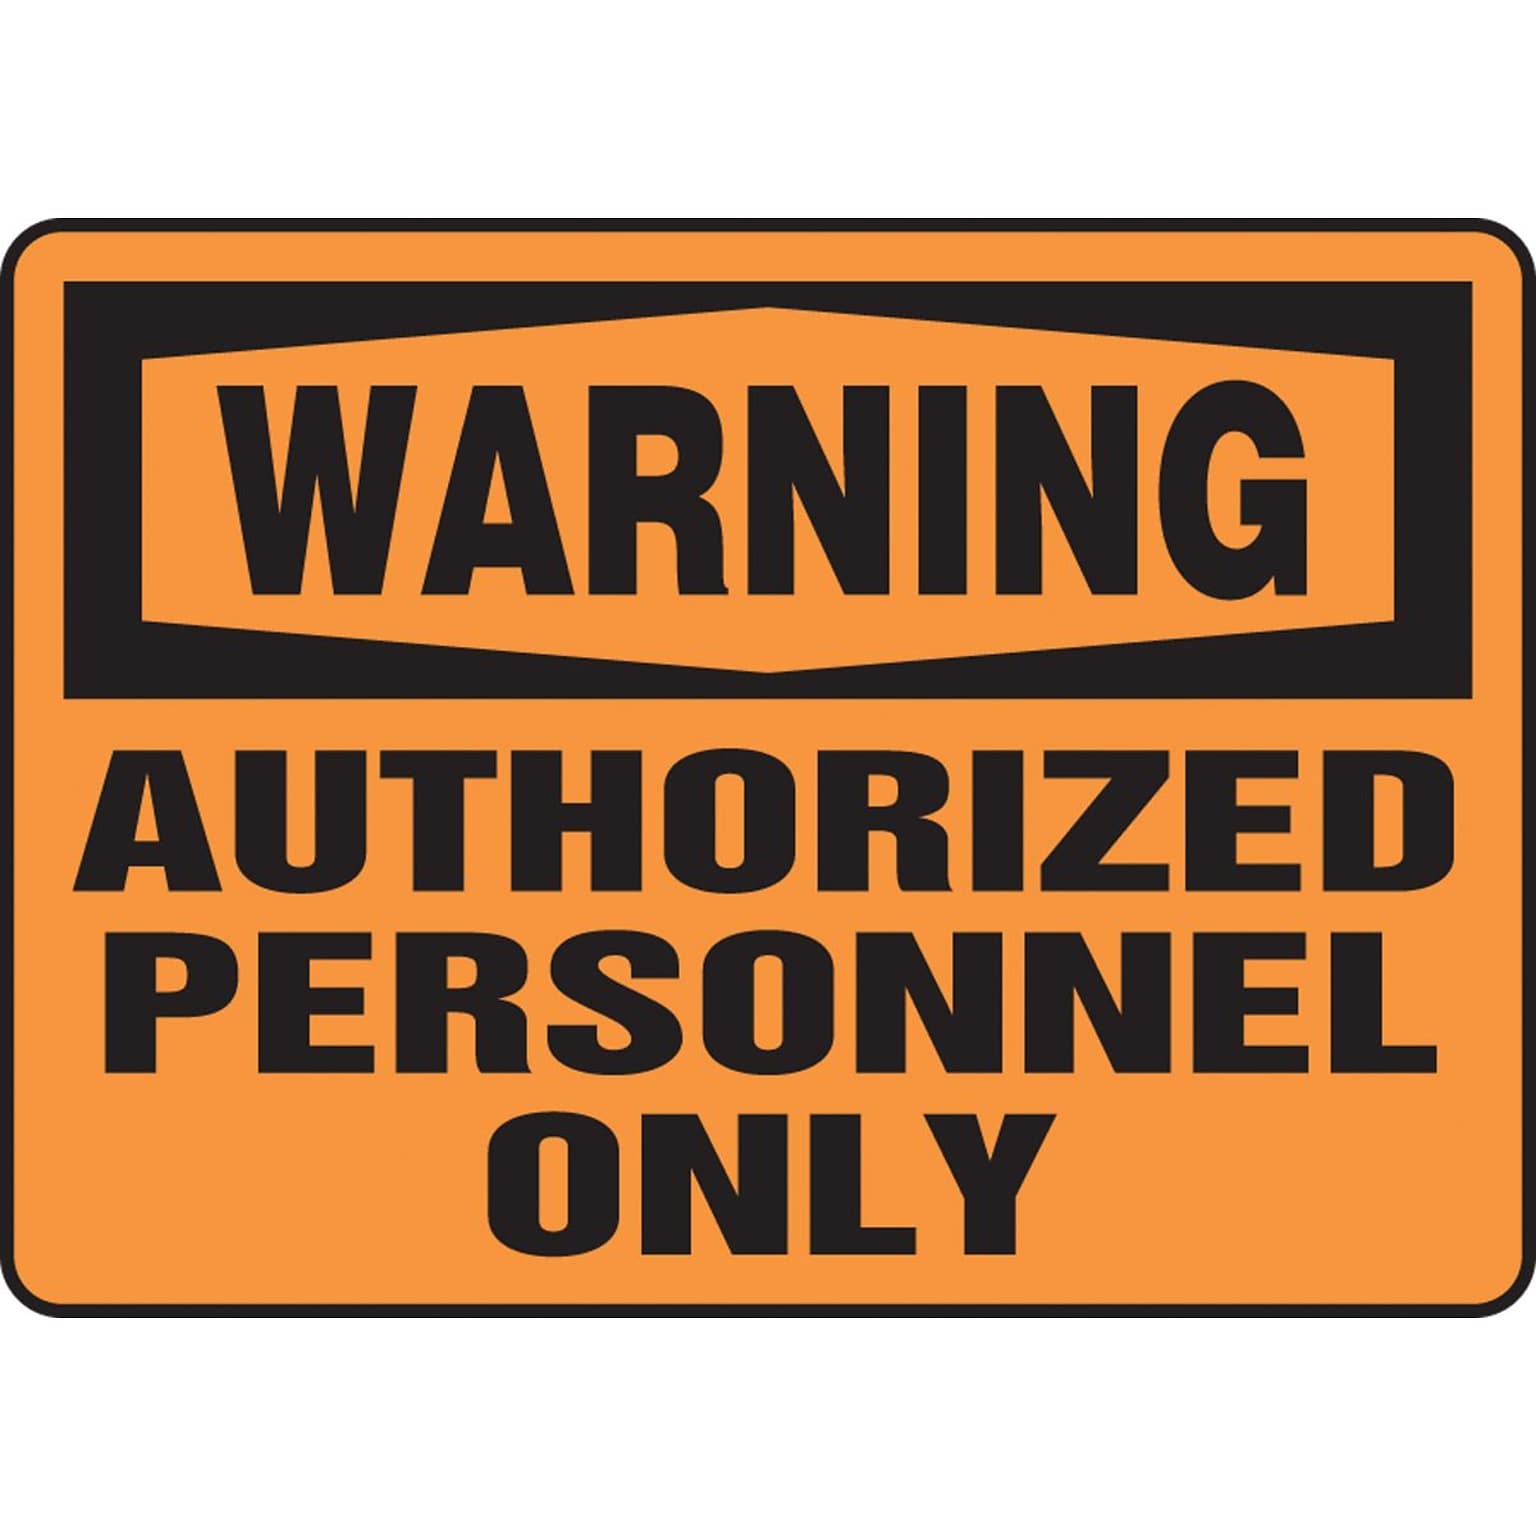 Accuform 10 x 14 Plastic Safety Sign WARNING AUTHORIZED PERSONNEL ONLY, Black On Orange (MADM323VP)